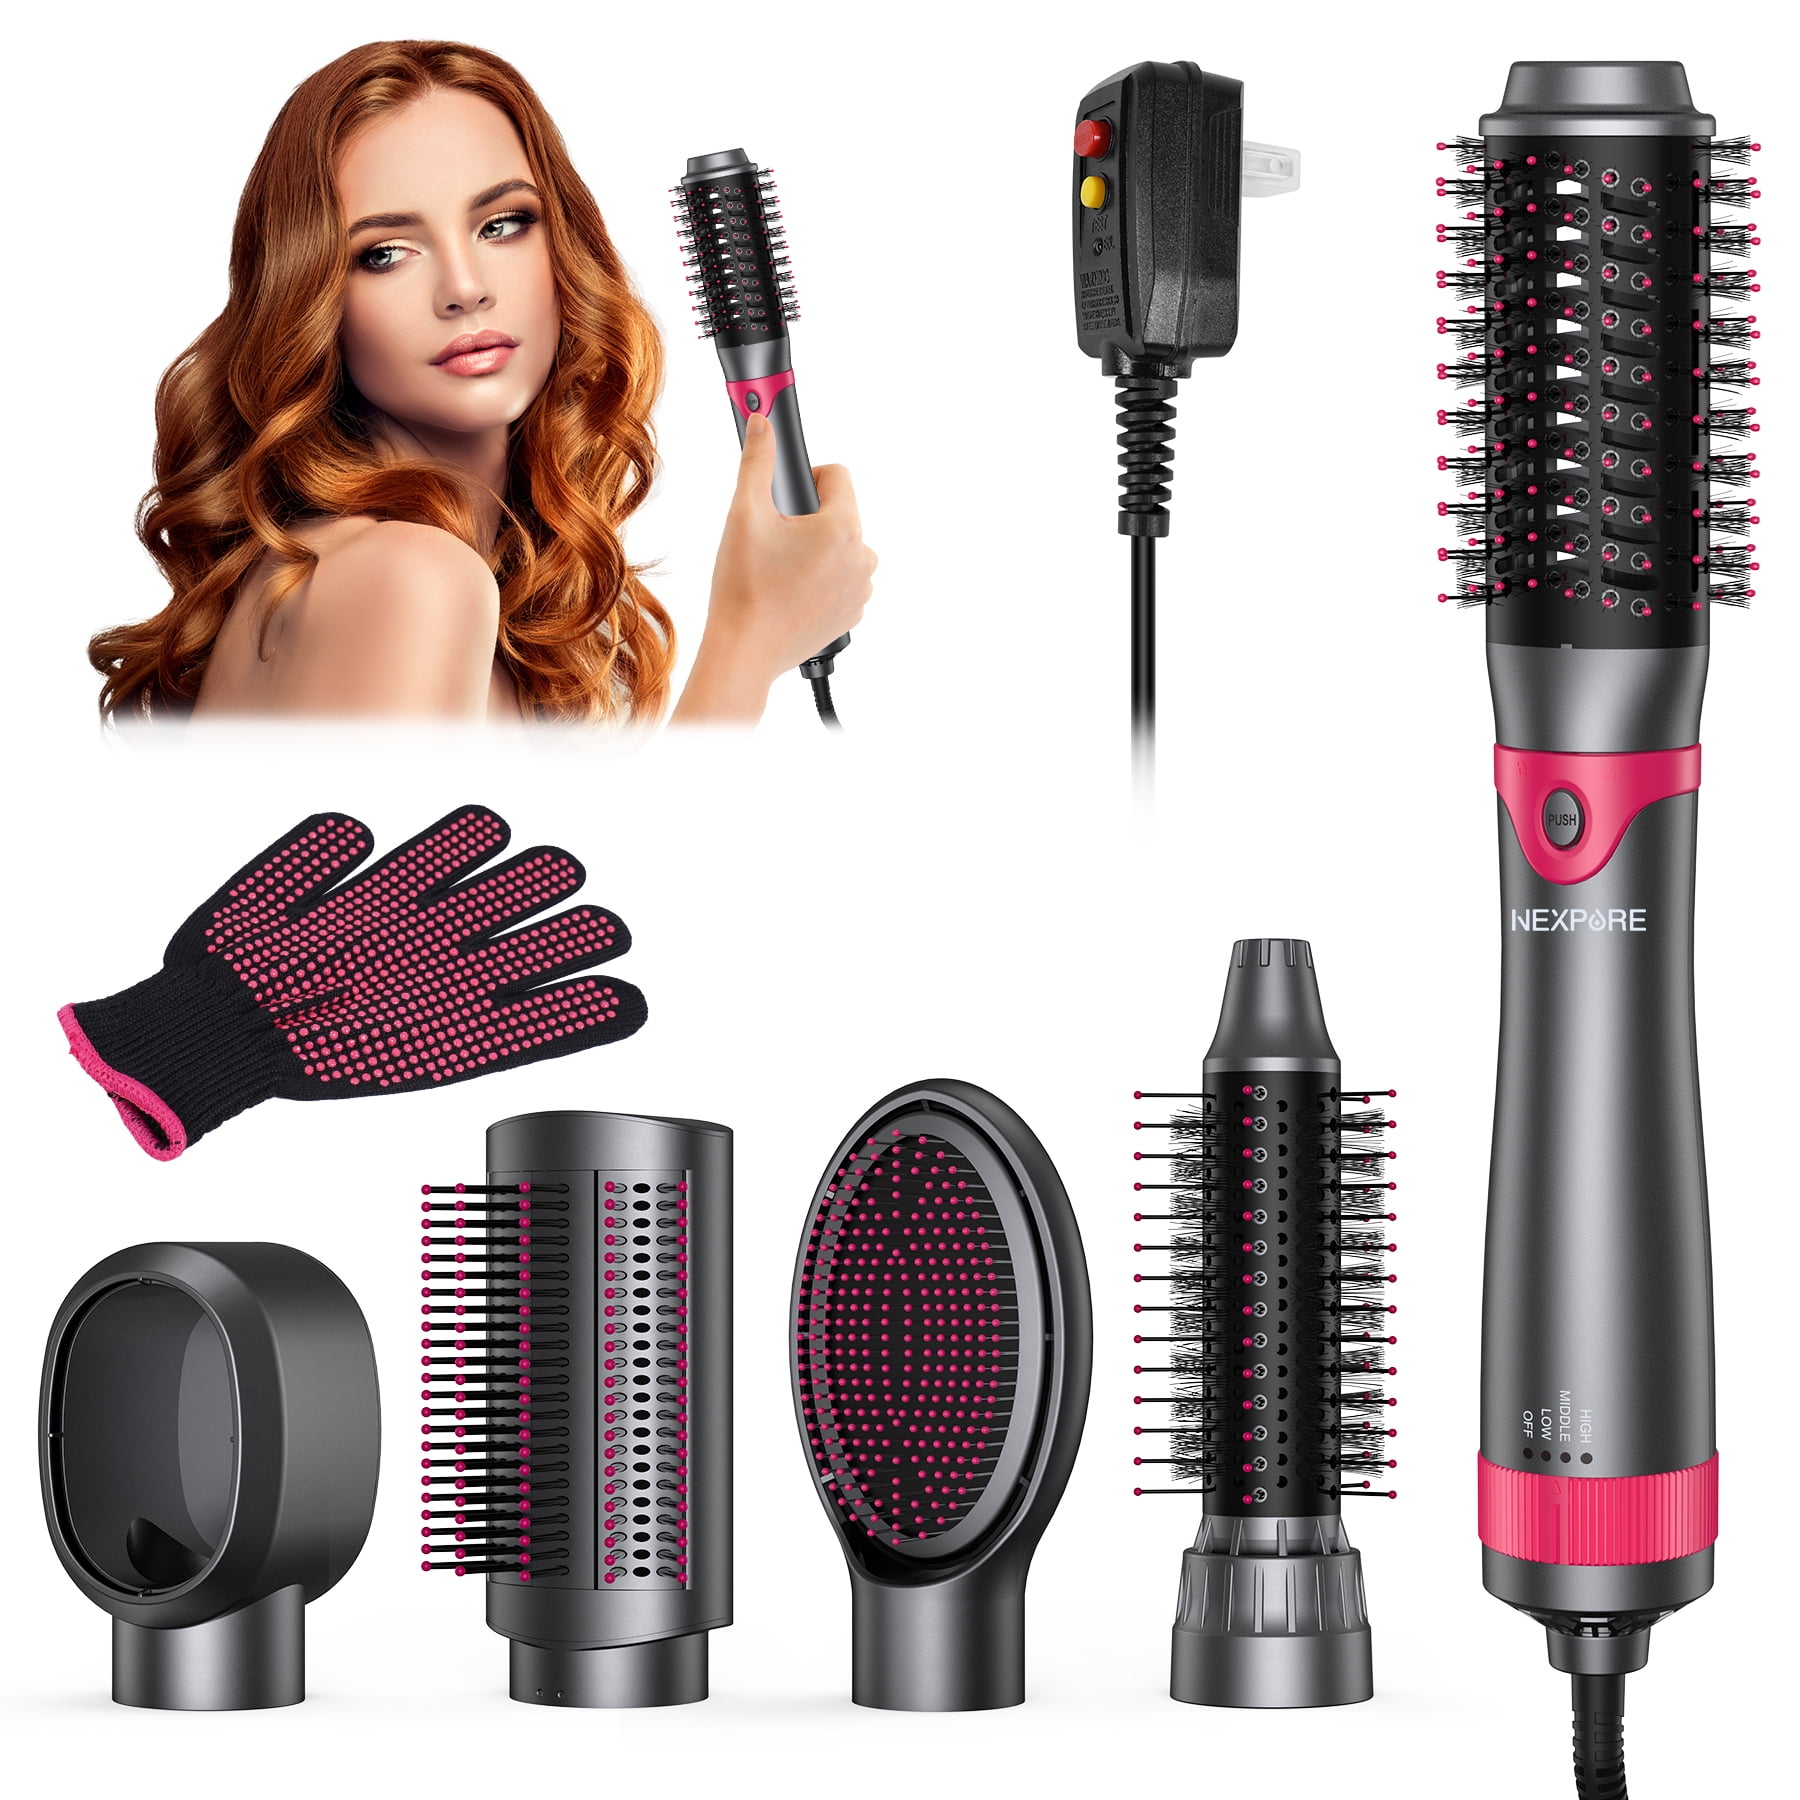 Nexpure 5 in 1 Multifunctional Hair Dryer Styling Tool, Detachable 5-in-1  Multi-Head Hot Air Comb, the Negative Ion Automatic Suction Hair Curler for  Women 